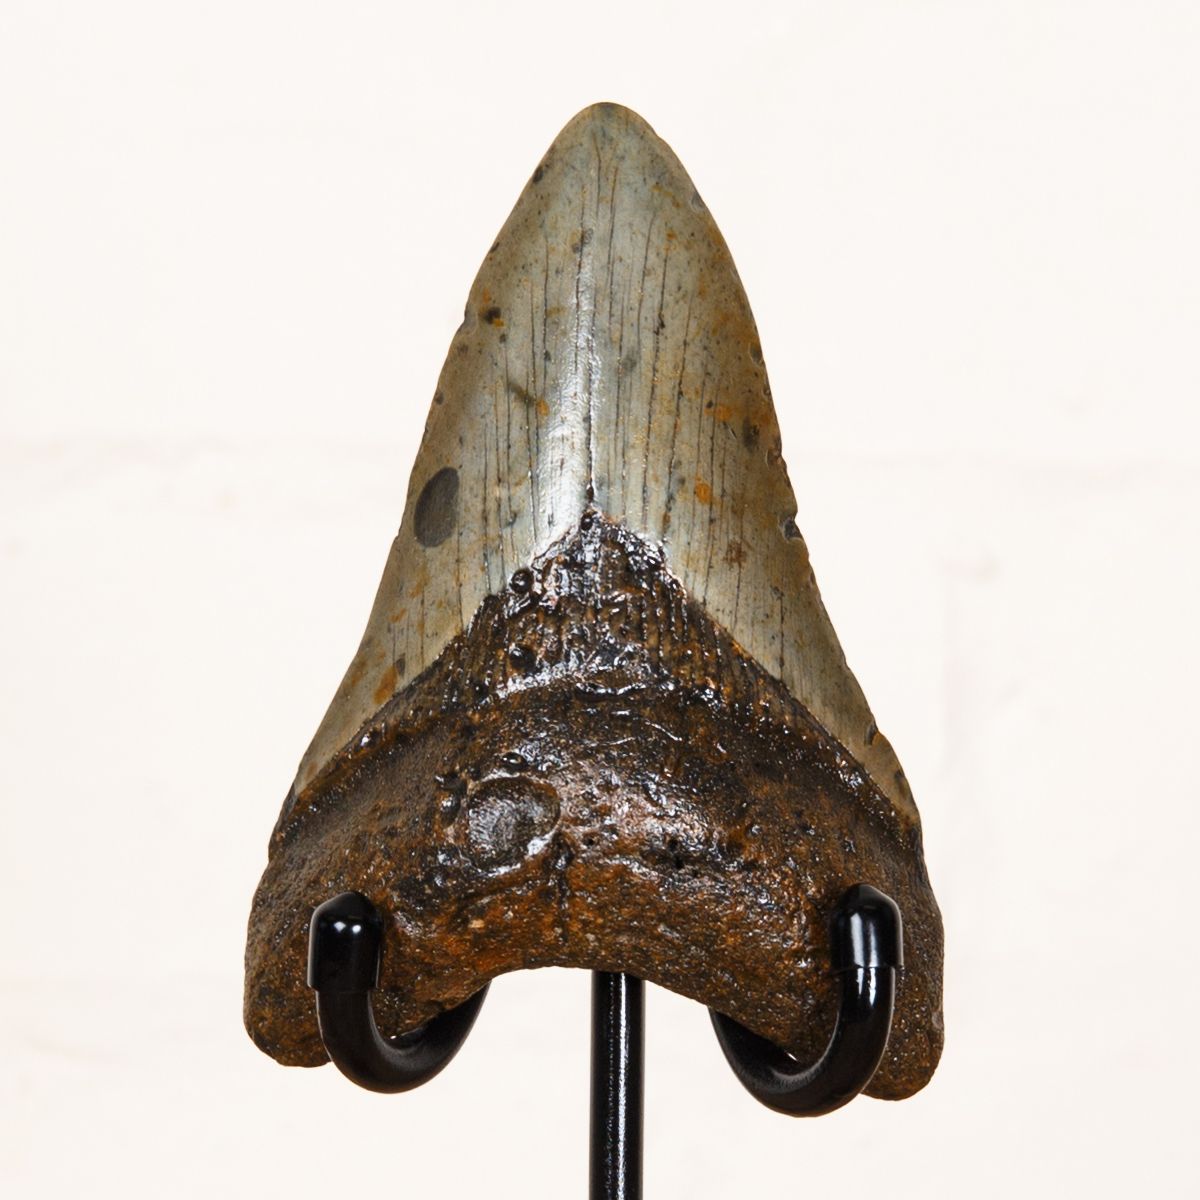 Huge 4.2 Inch Megalodon Shark Tooth Fossil on Stand (Carcharodon megalodon)